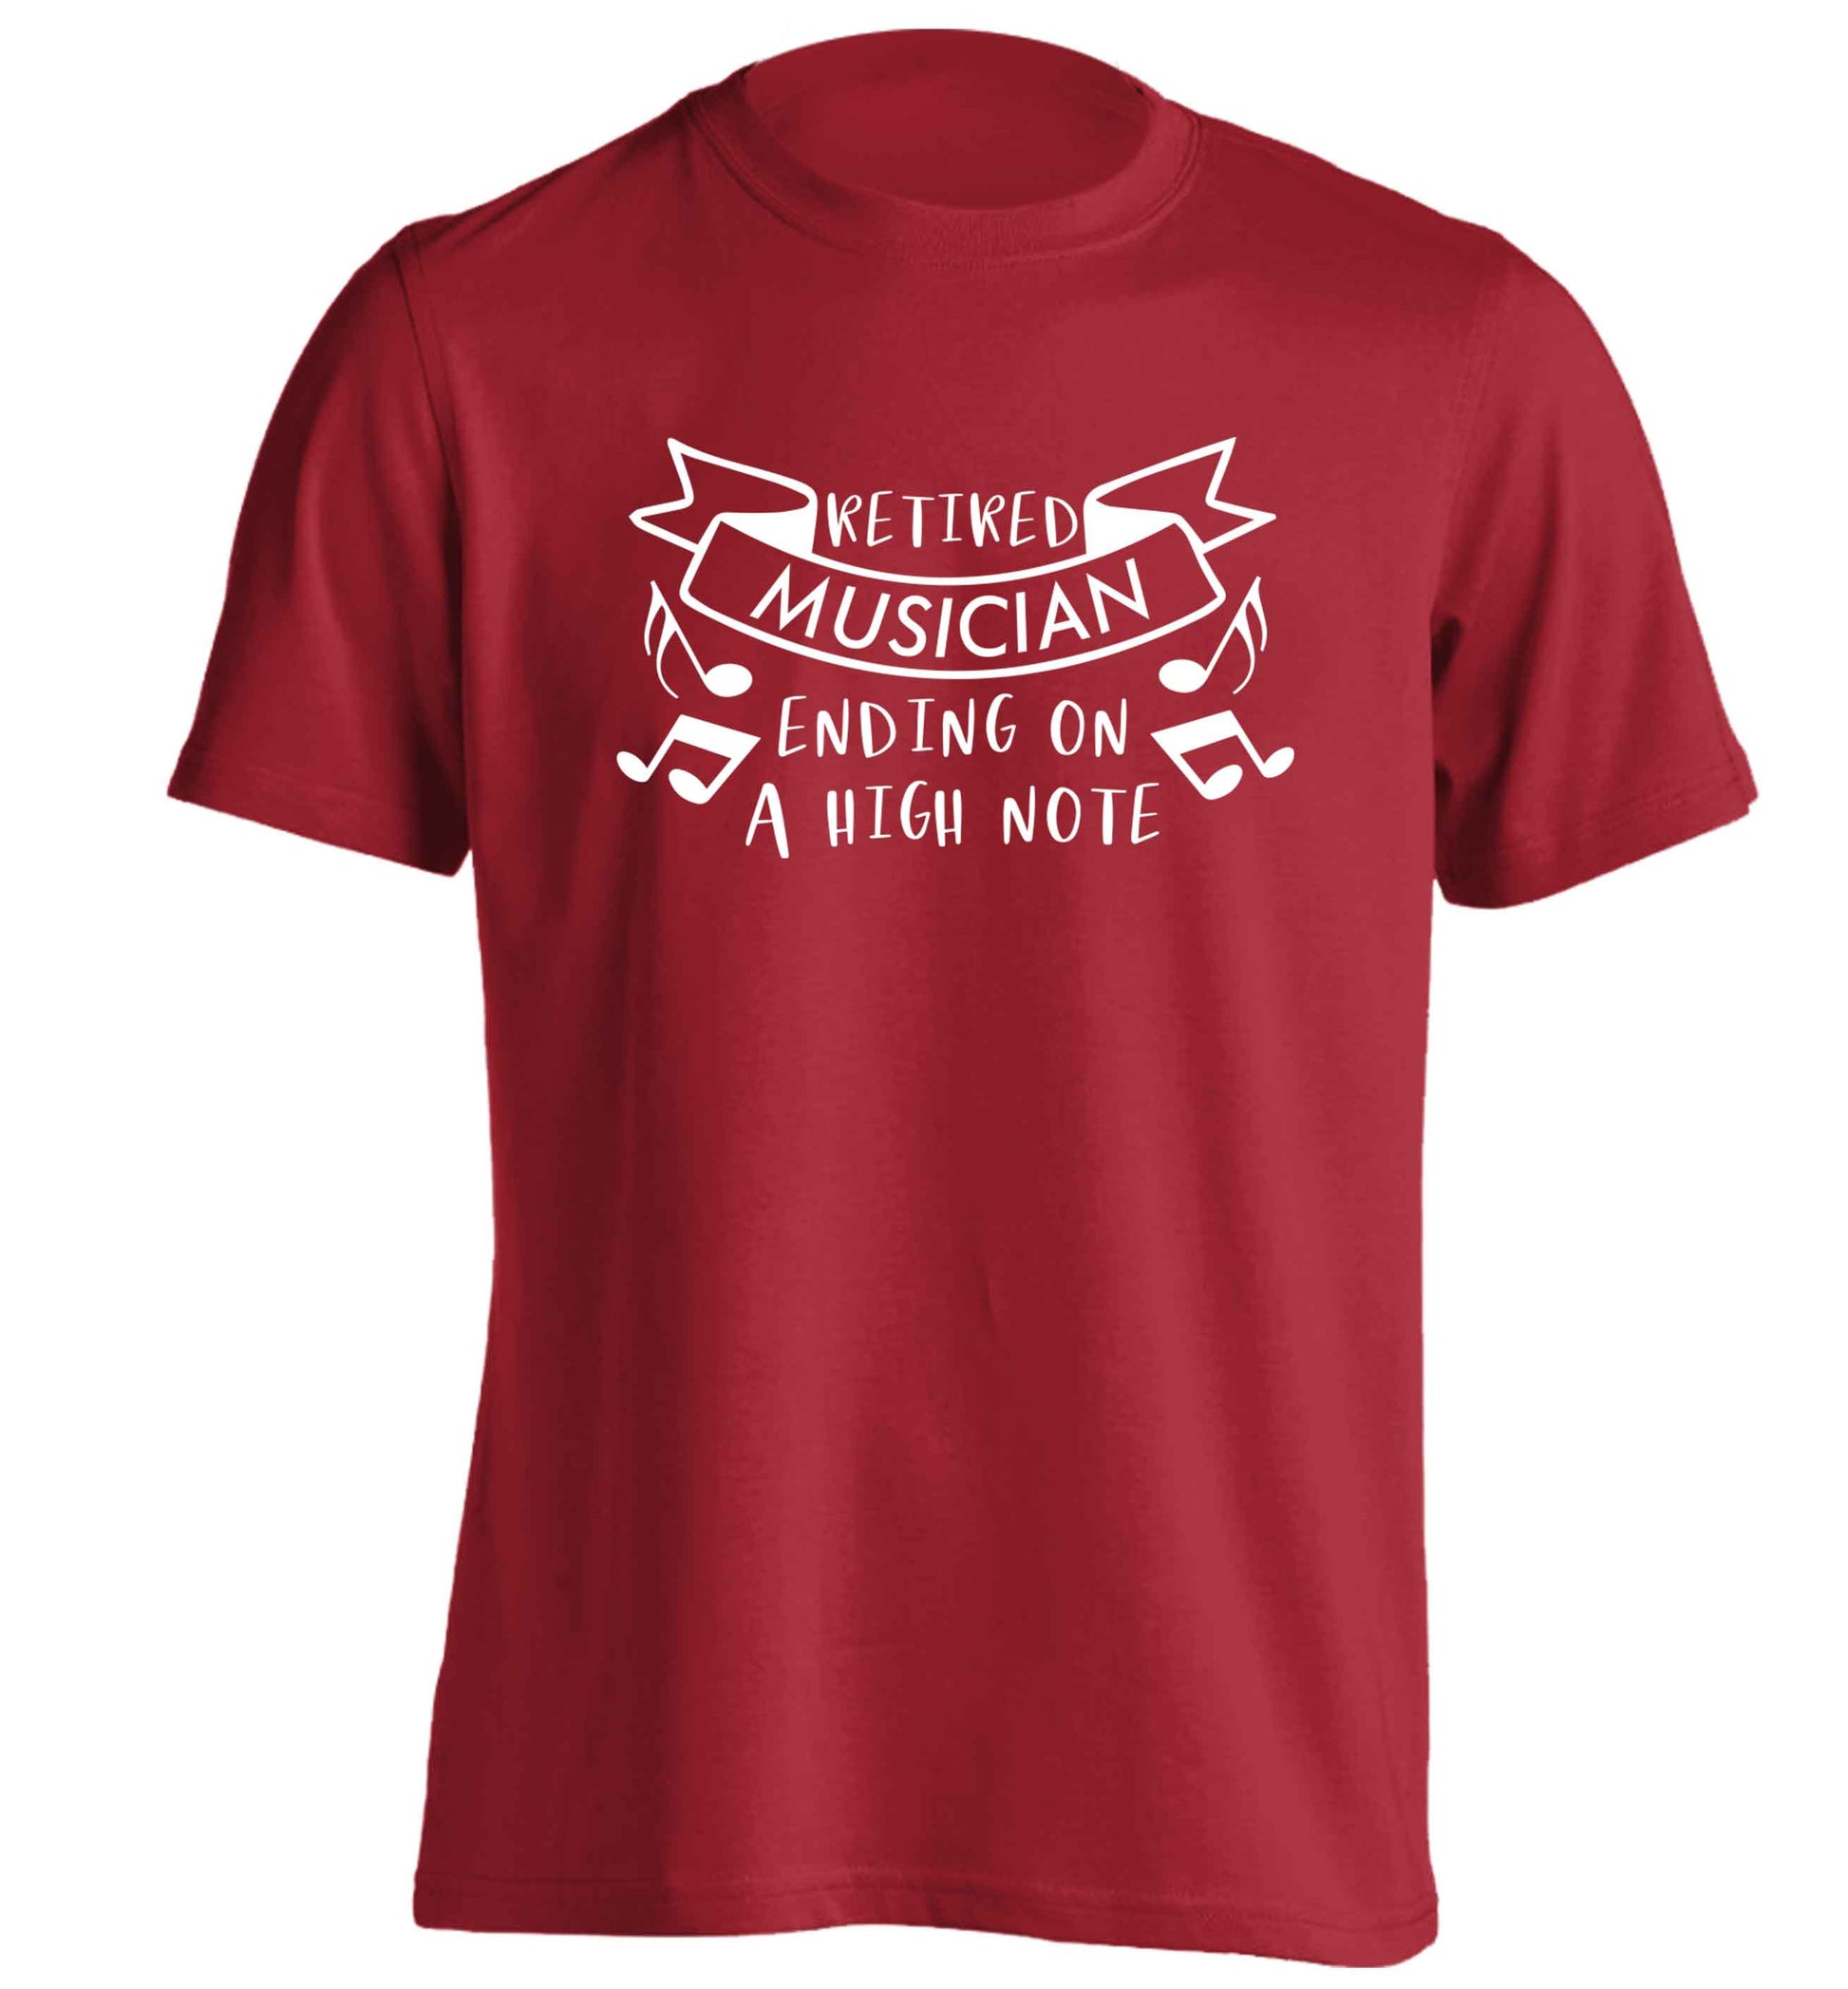 Retired musician ending on a high note adults unisex red Tshirt 2XL